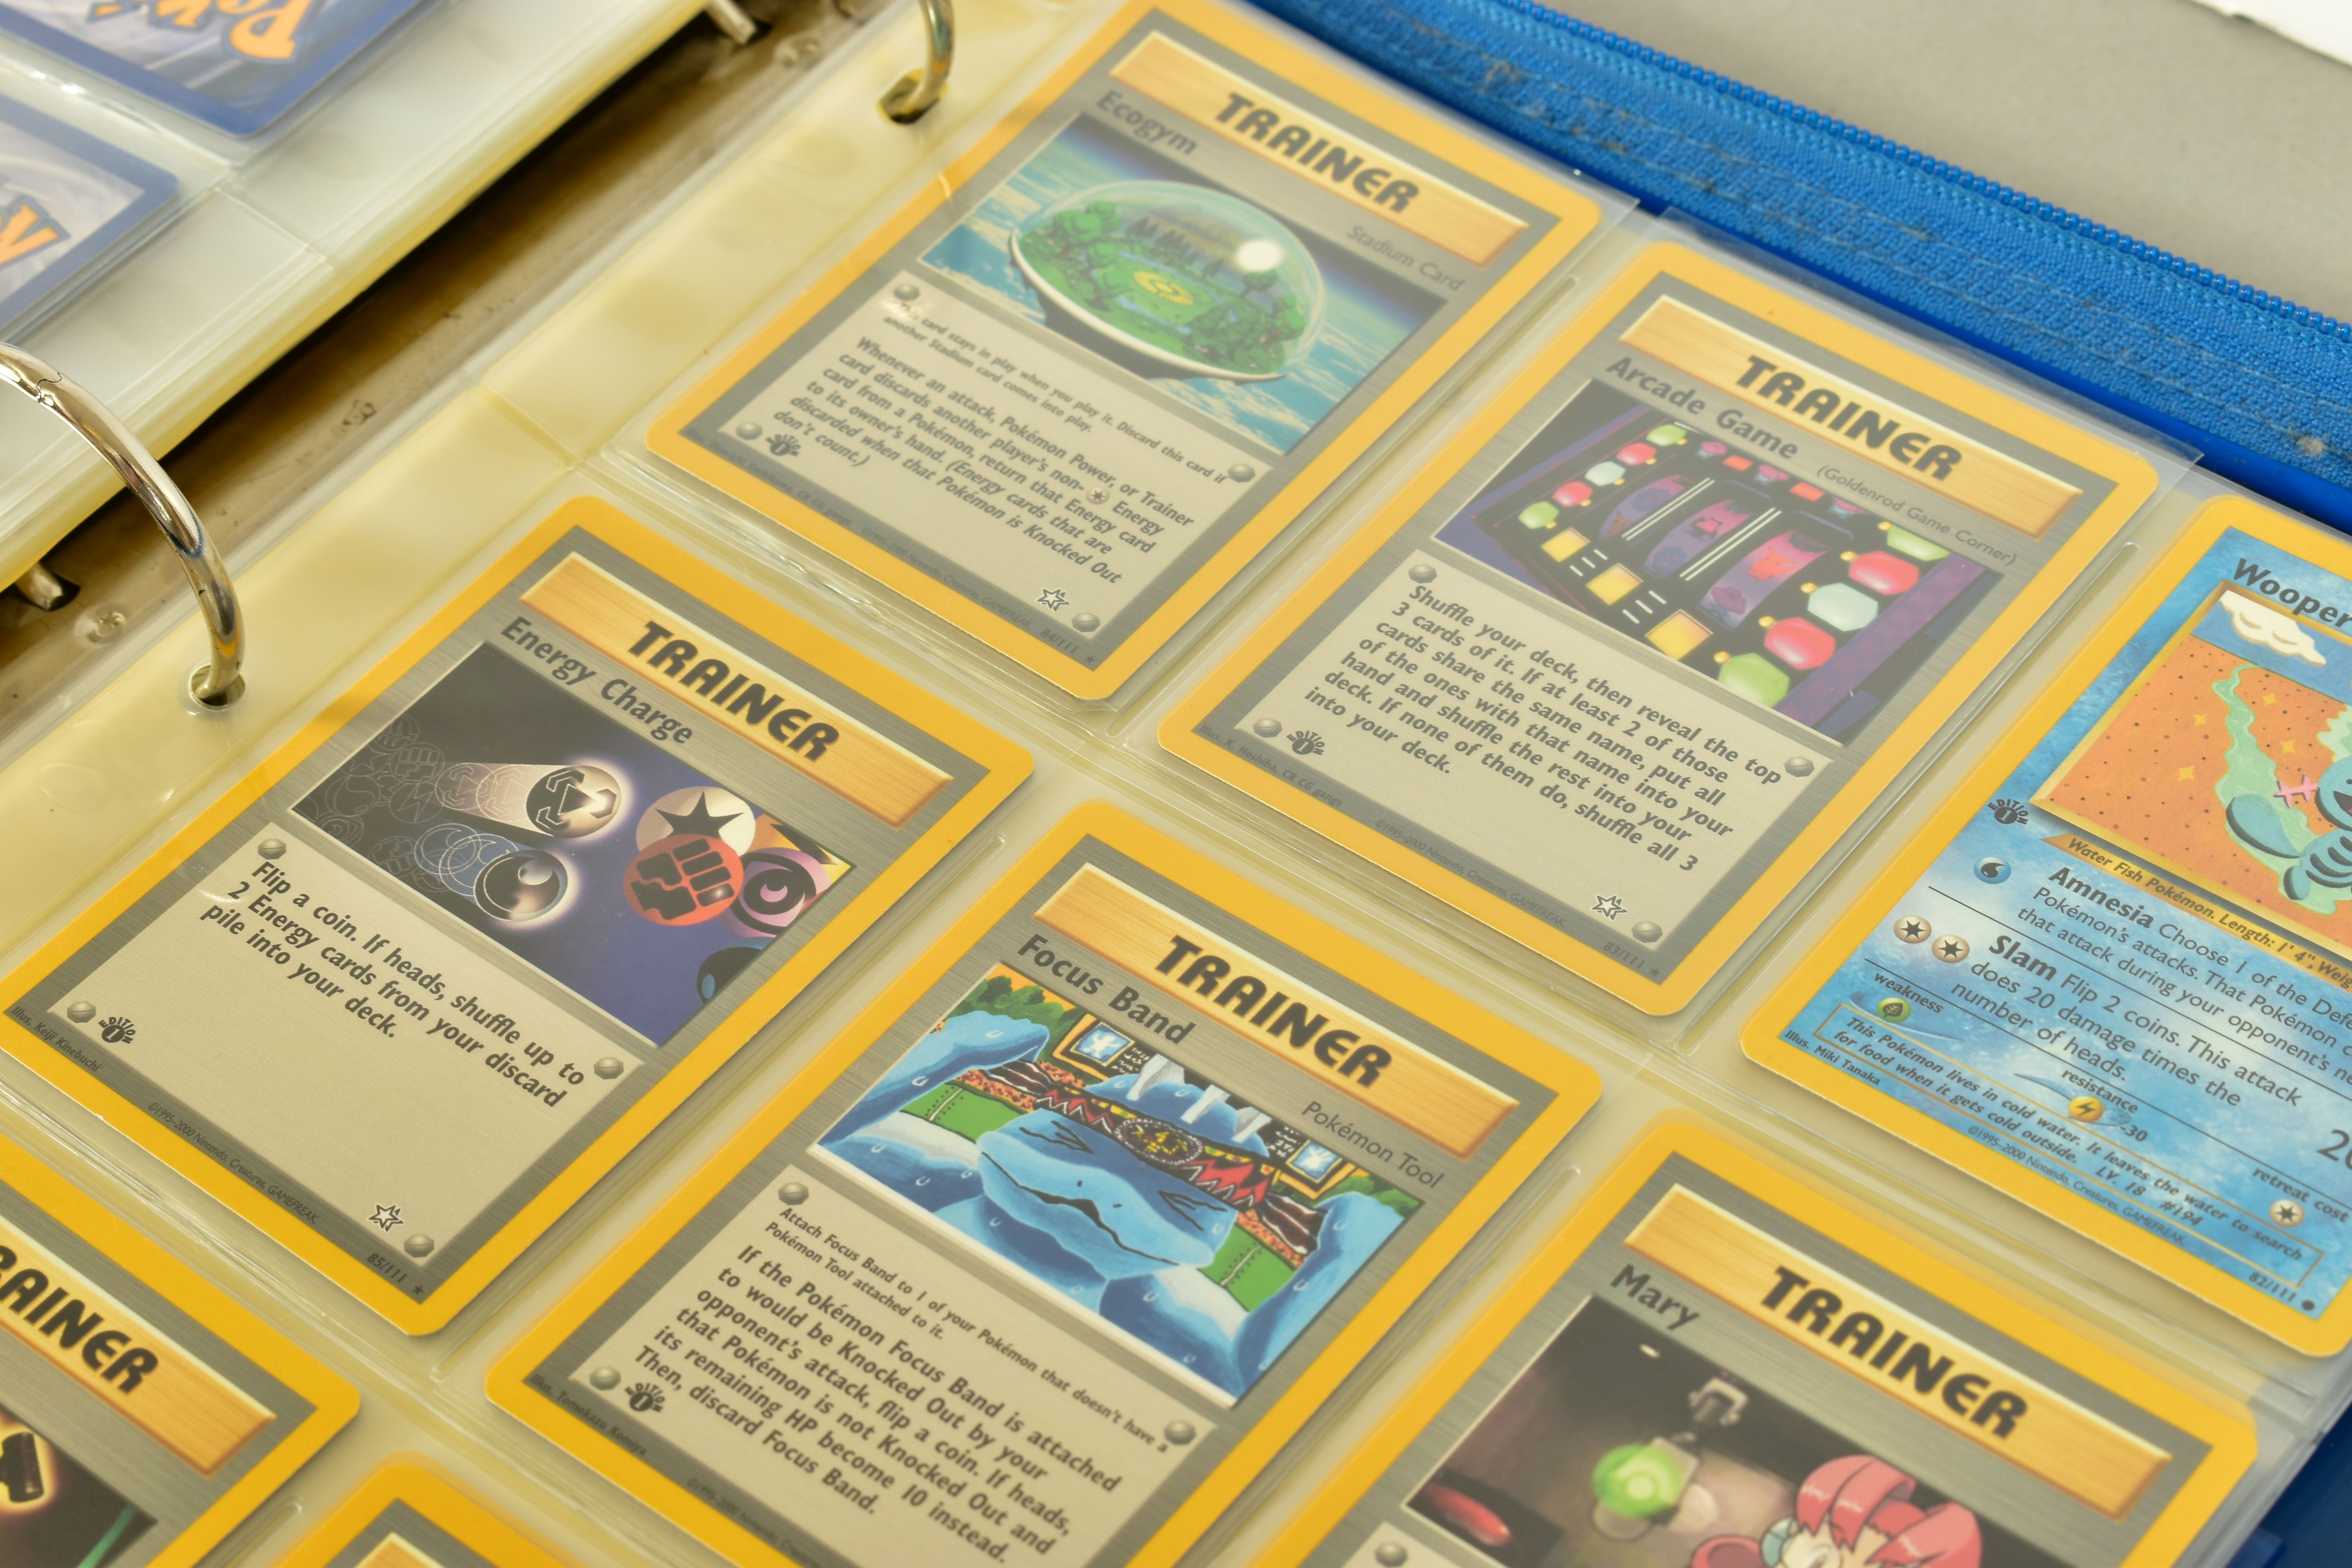 THE COMPLETE POKEMON CARD NEO GENESIS AND NEO DISCOVERY SETS, containing many first edition cards. - Image 16 of 32